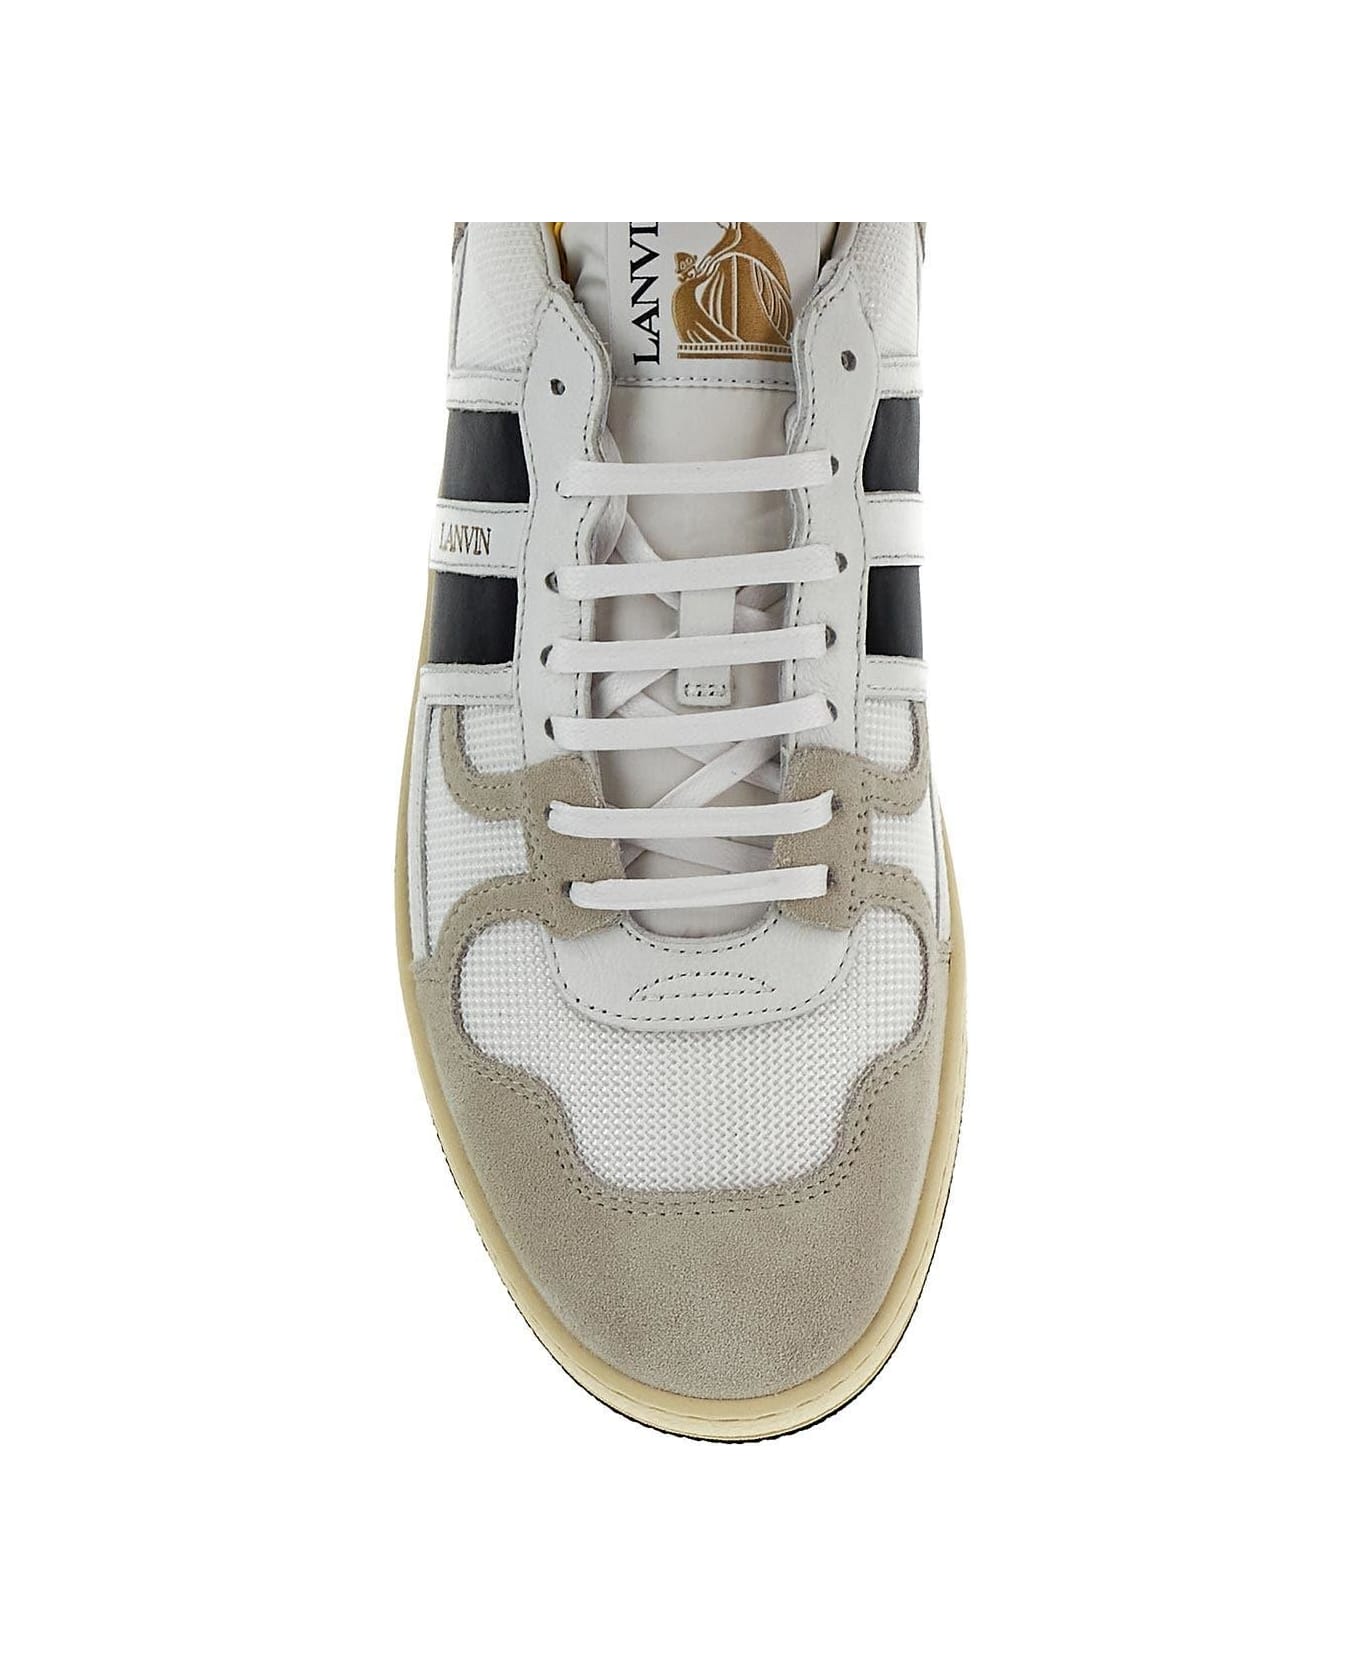 Lanvin Mesh Clay Low-top Sneakers - White and black